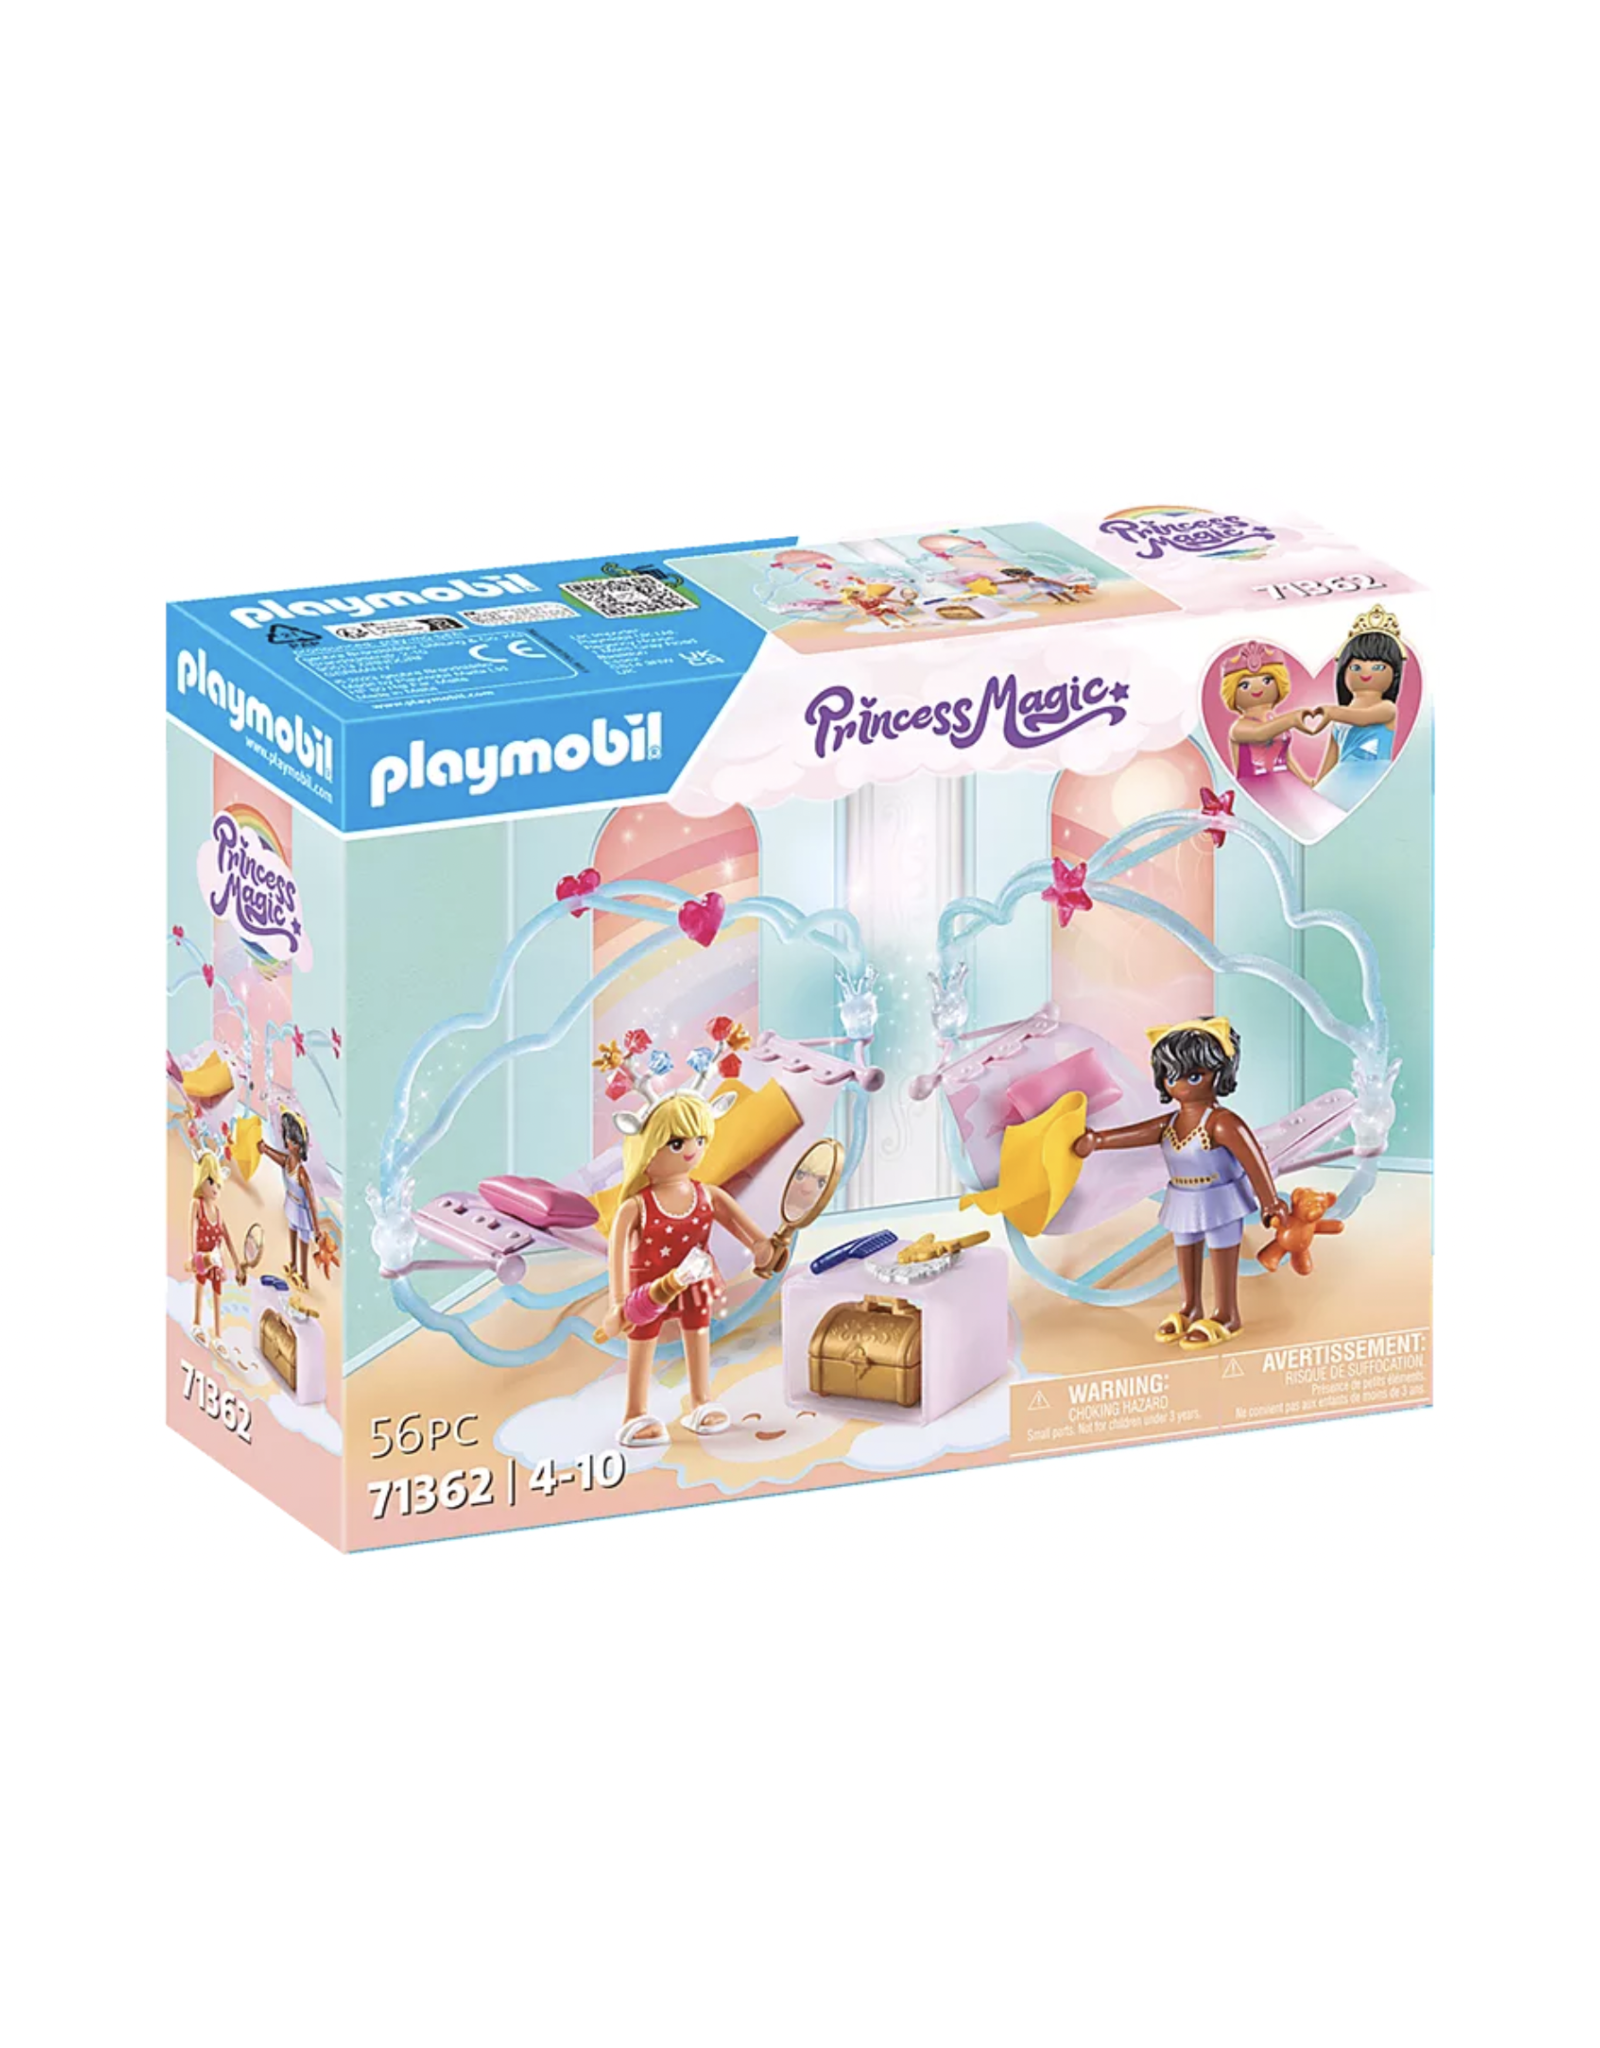 Princess Party in the Clouds - 71362